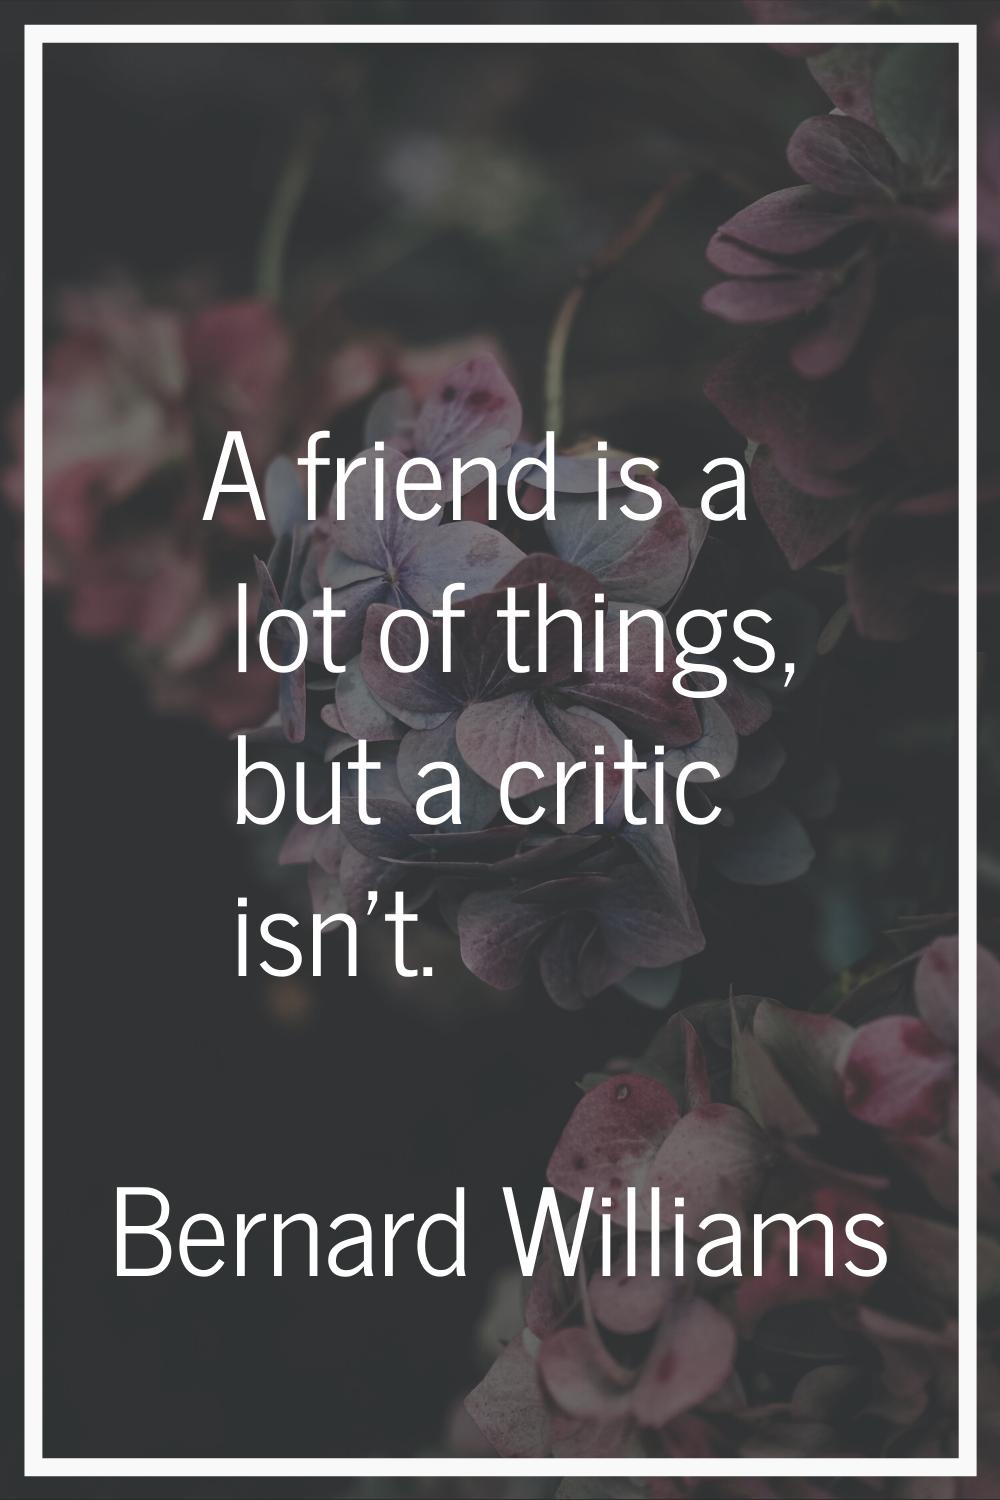 A friend is a lot of things, but a critic isn't.